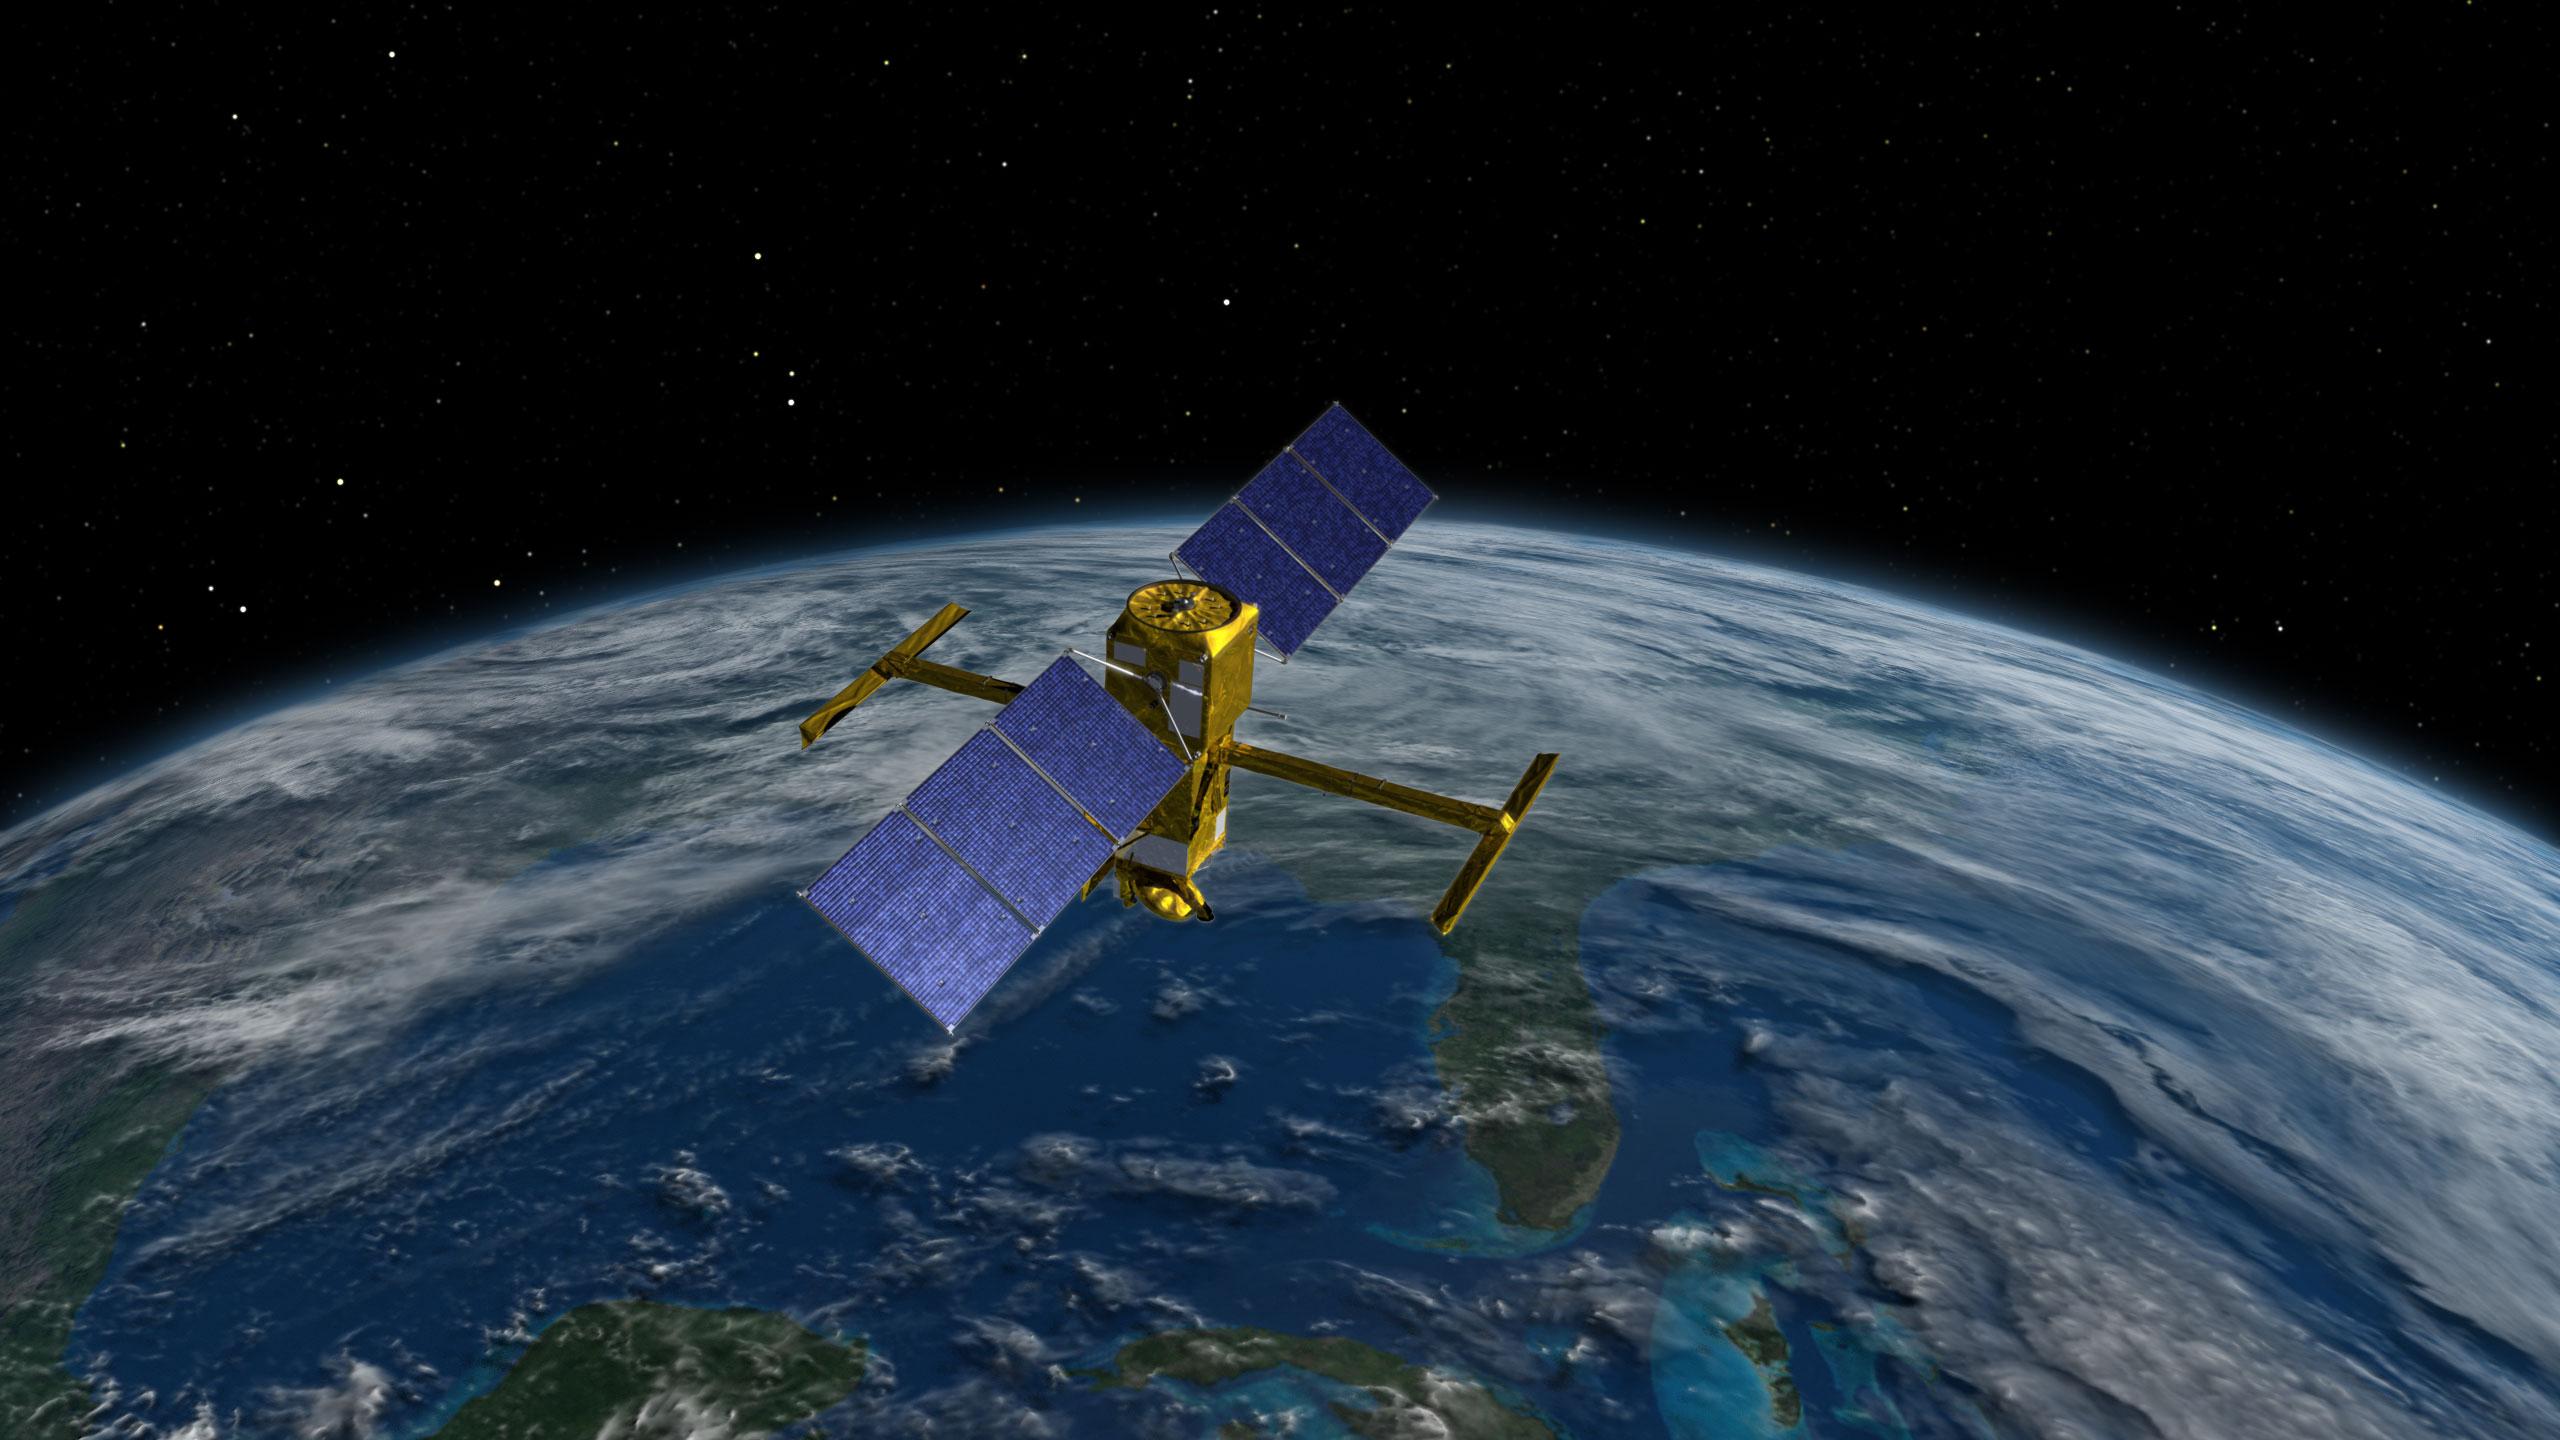 This illustration shows the international Surface Water and Ocean Topography (SWOT) satellite in orbit over Earth. SWOT’s main instrument, KaRIn, helps survey the water on more than 90% of Earth's surface.